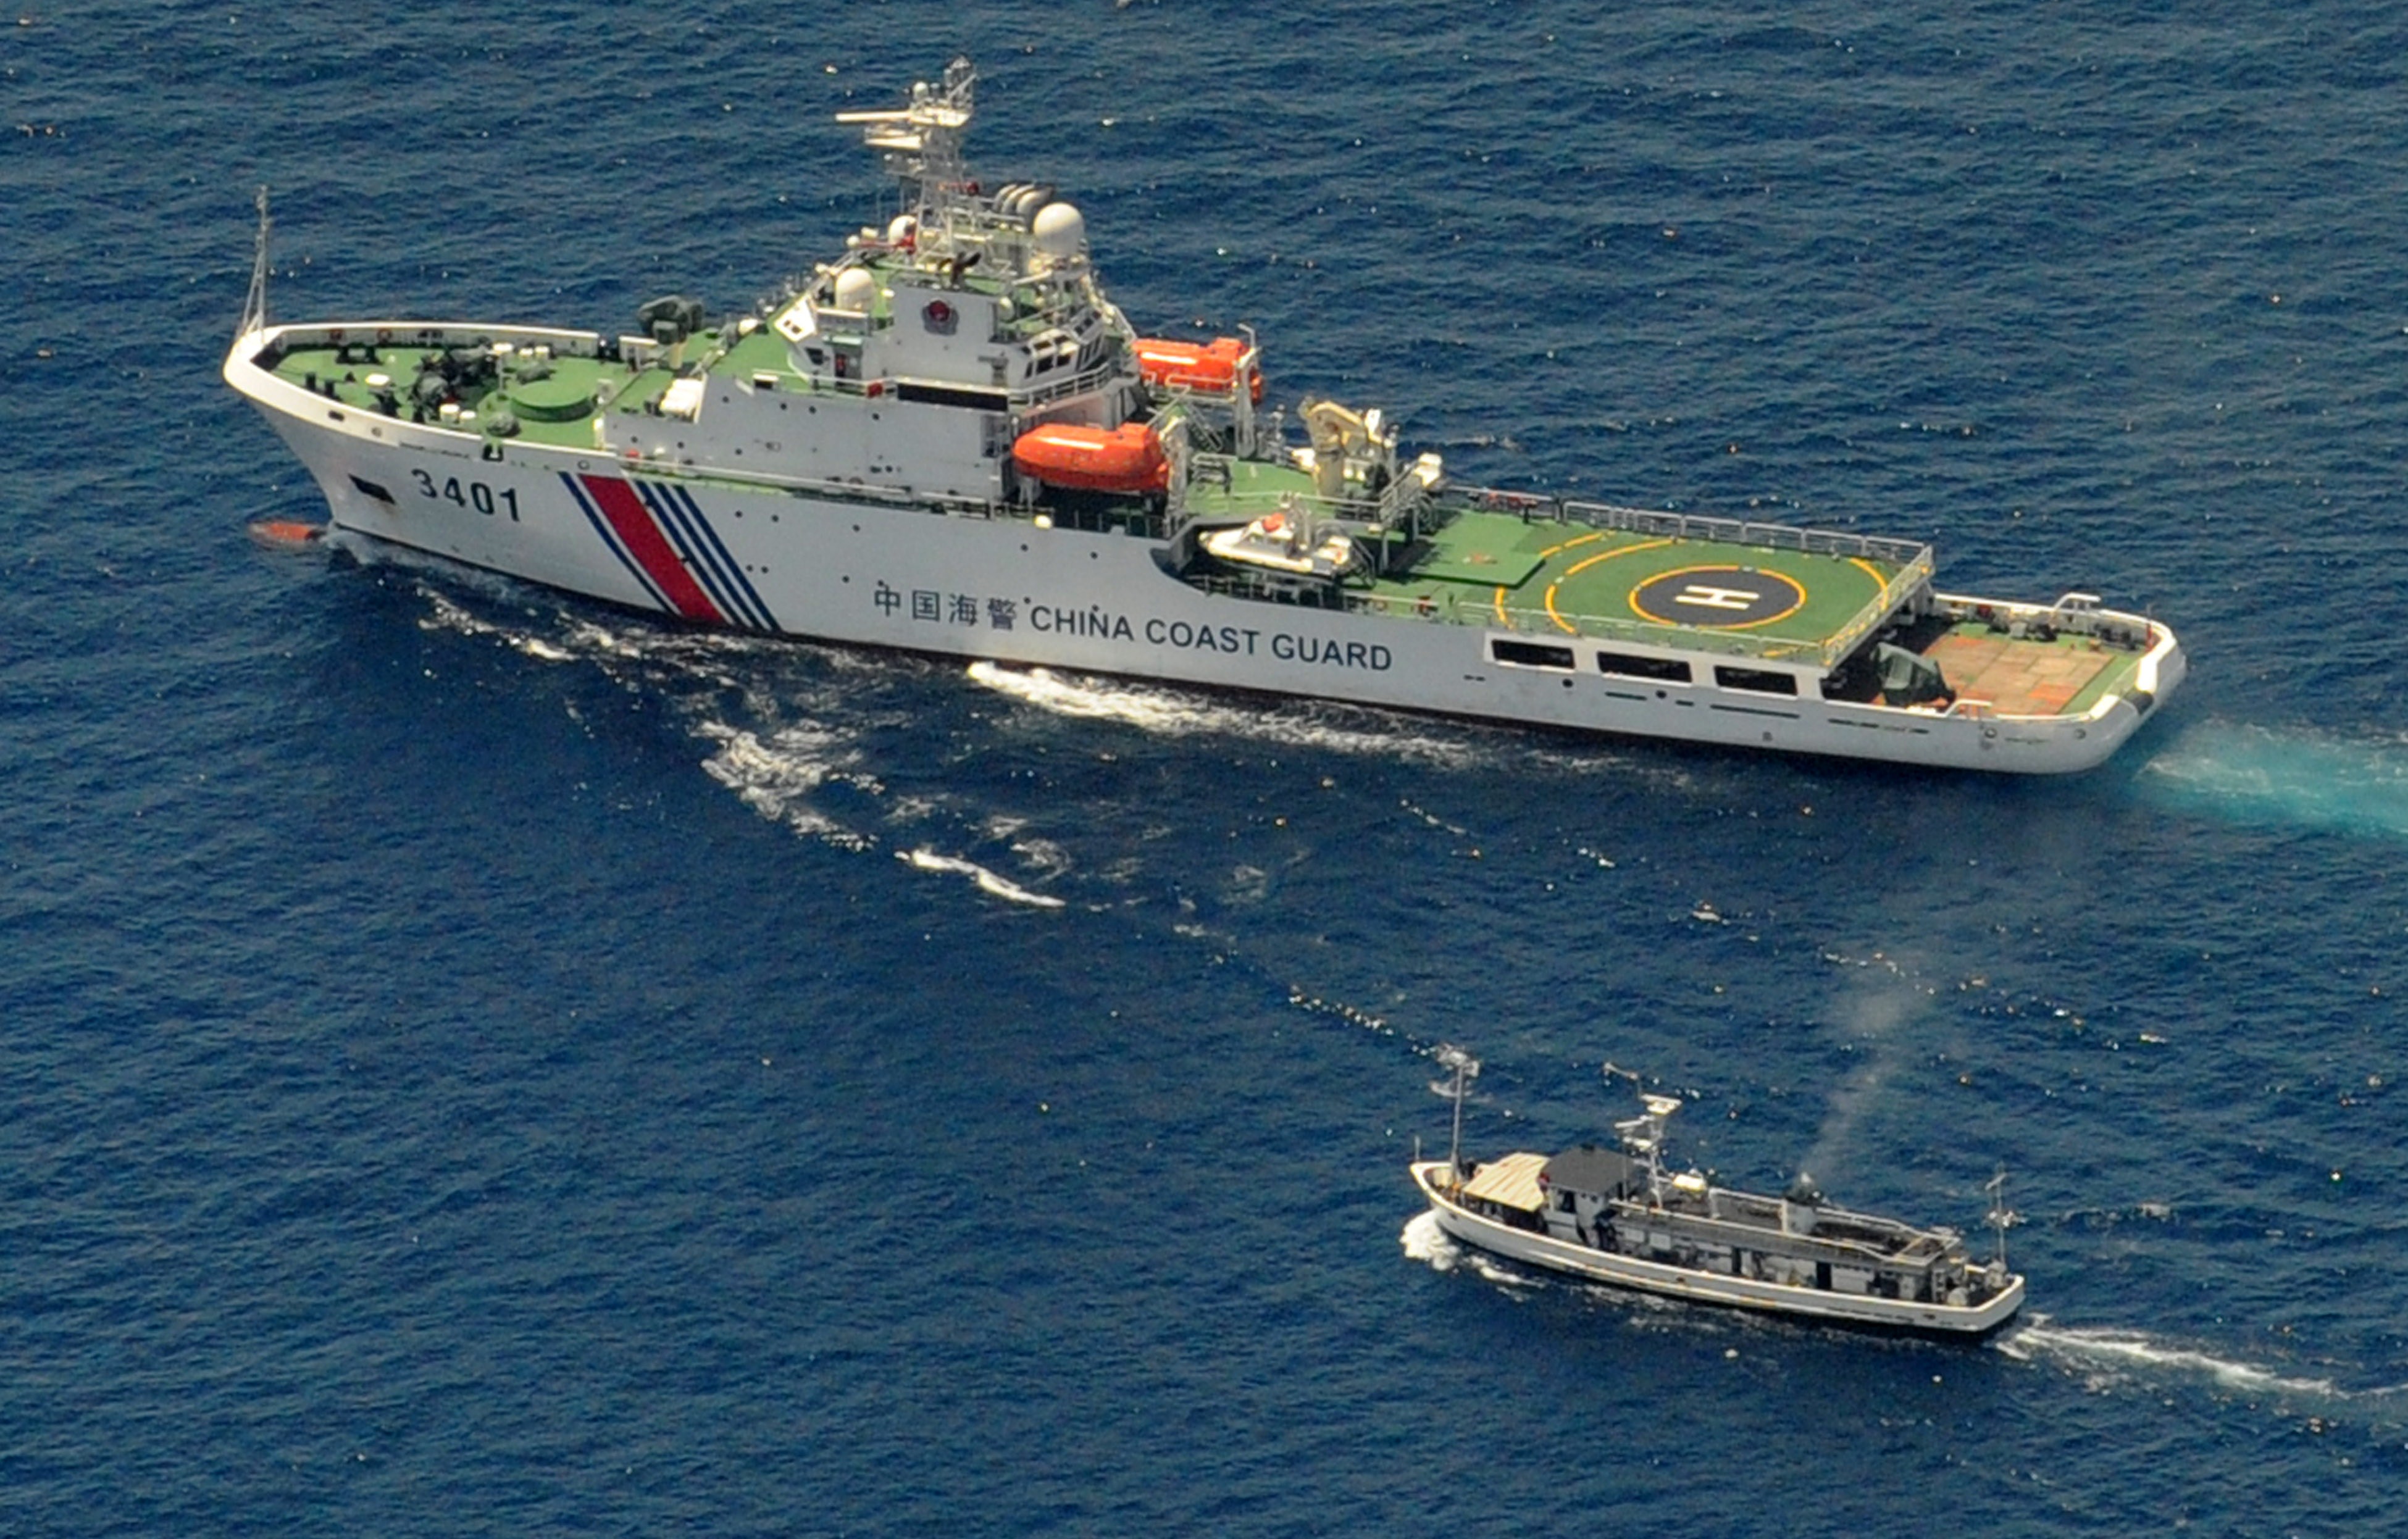 A China Coast Guard ship and a Philippine supply boat engage in a standoff as the Philippine boat attempts to reach the Second Thomas Shoal, a remote South China Sea reef claimed by both countries, on March 29, 2014 (Jay Directo—AFP/Getty Images)